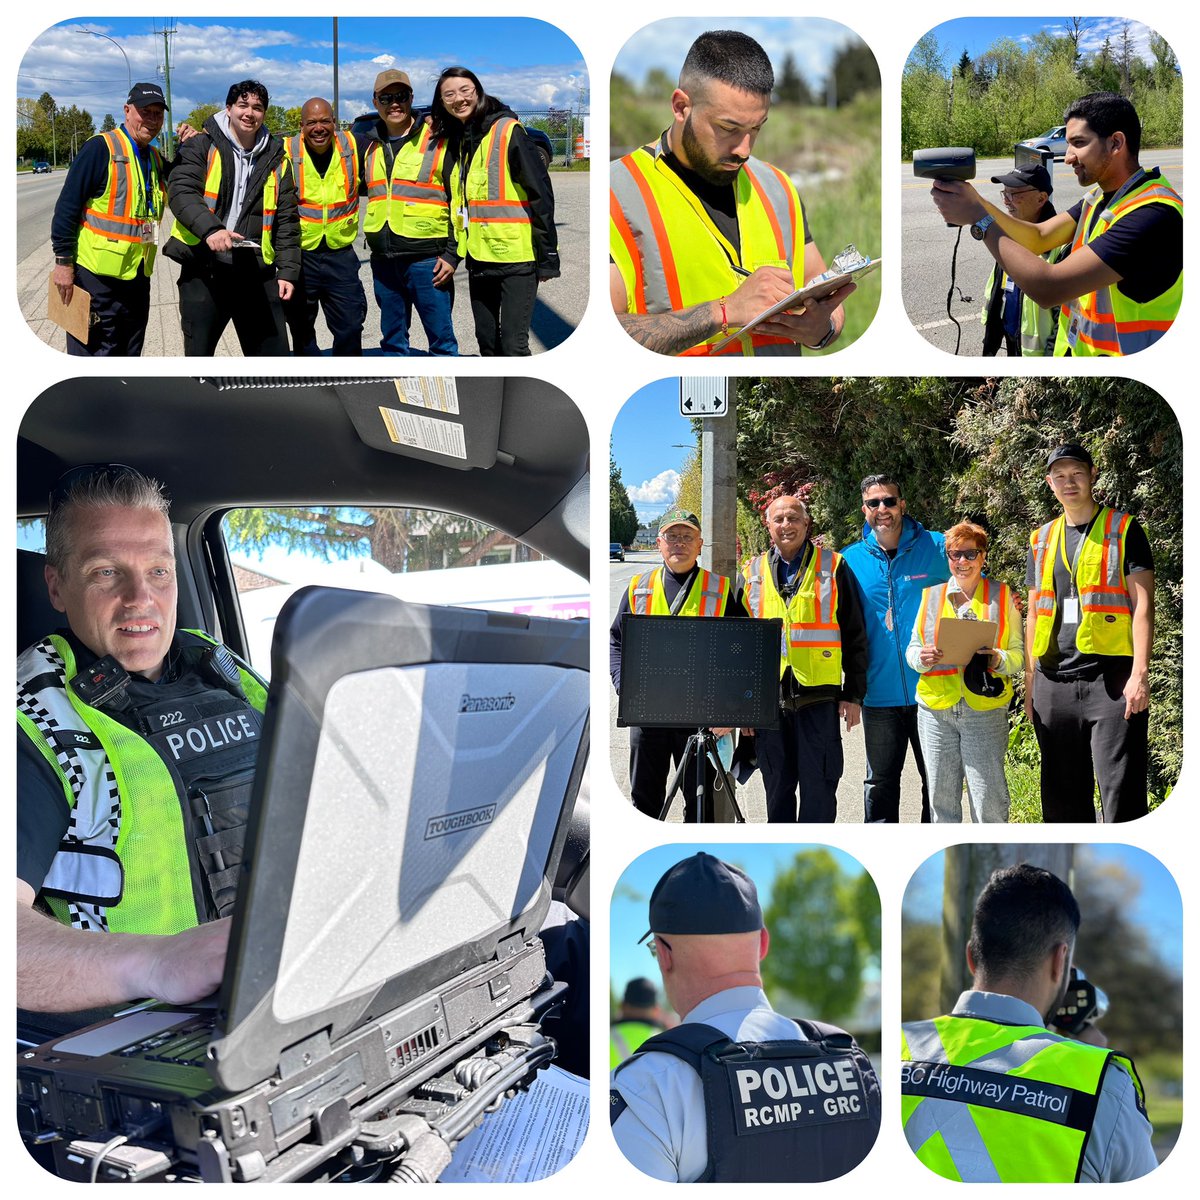 Thank you @RichmondRCMP members, #RCMP Speed Watch volunteers, @BCHwyPatrol, @MVTP_TMET @TransitPolice for coming together today to make roads safer @Richmond_BC #NoNeedForSpeed @icbc